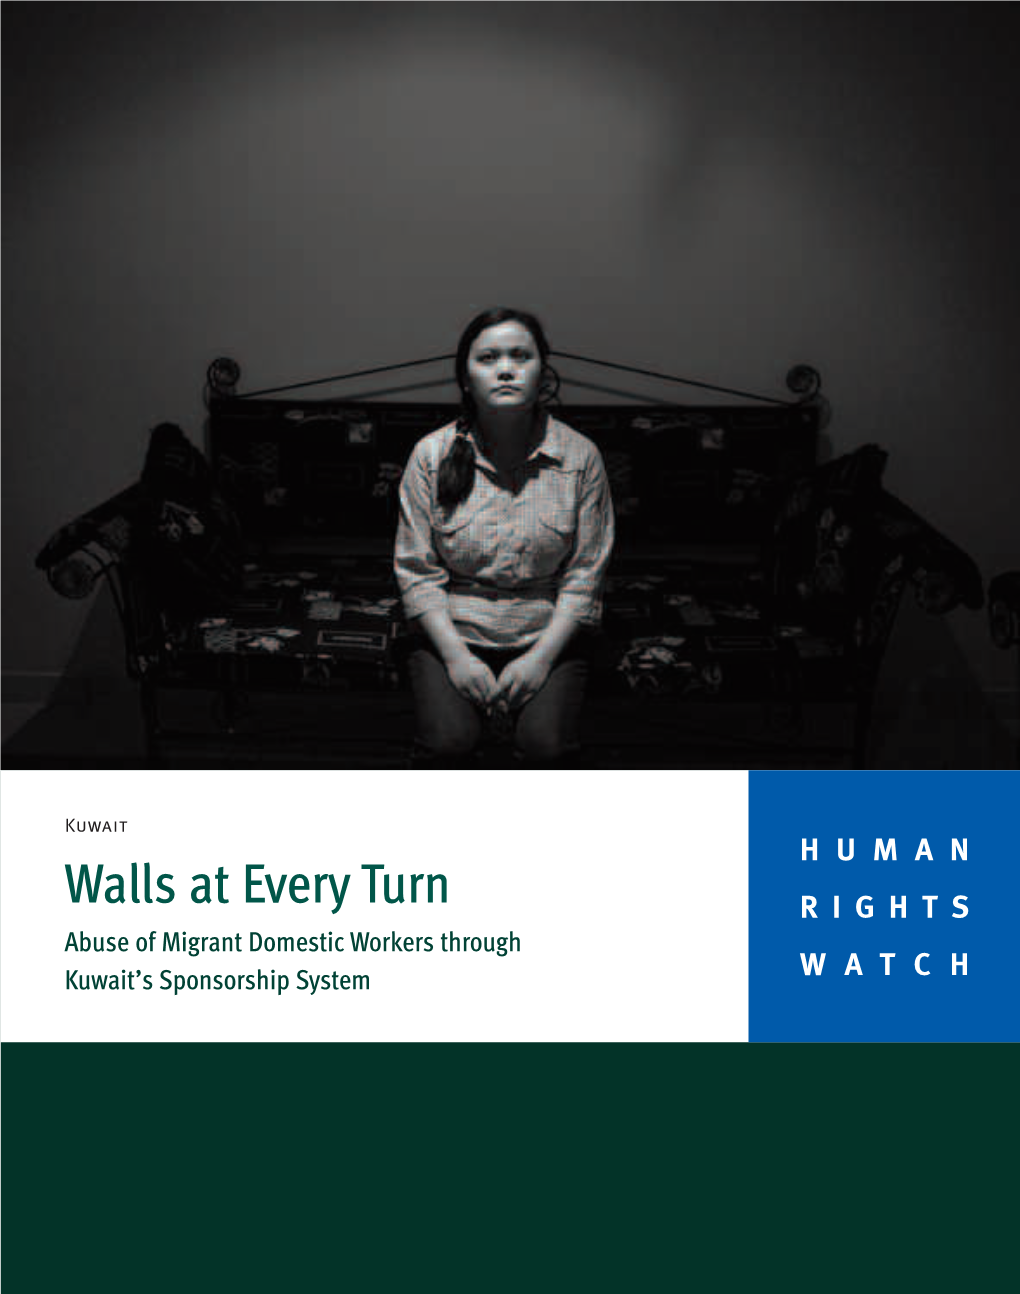 Kuwait HUMAN Walls at Every Turn RIGHTS Abuse of Migrant Domestic Workers Through Kuwait’S Sponsorship System WATCH